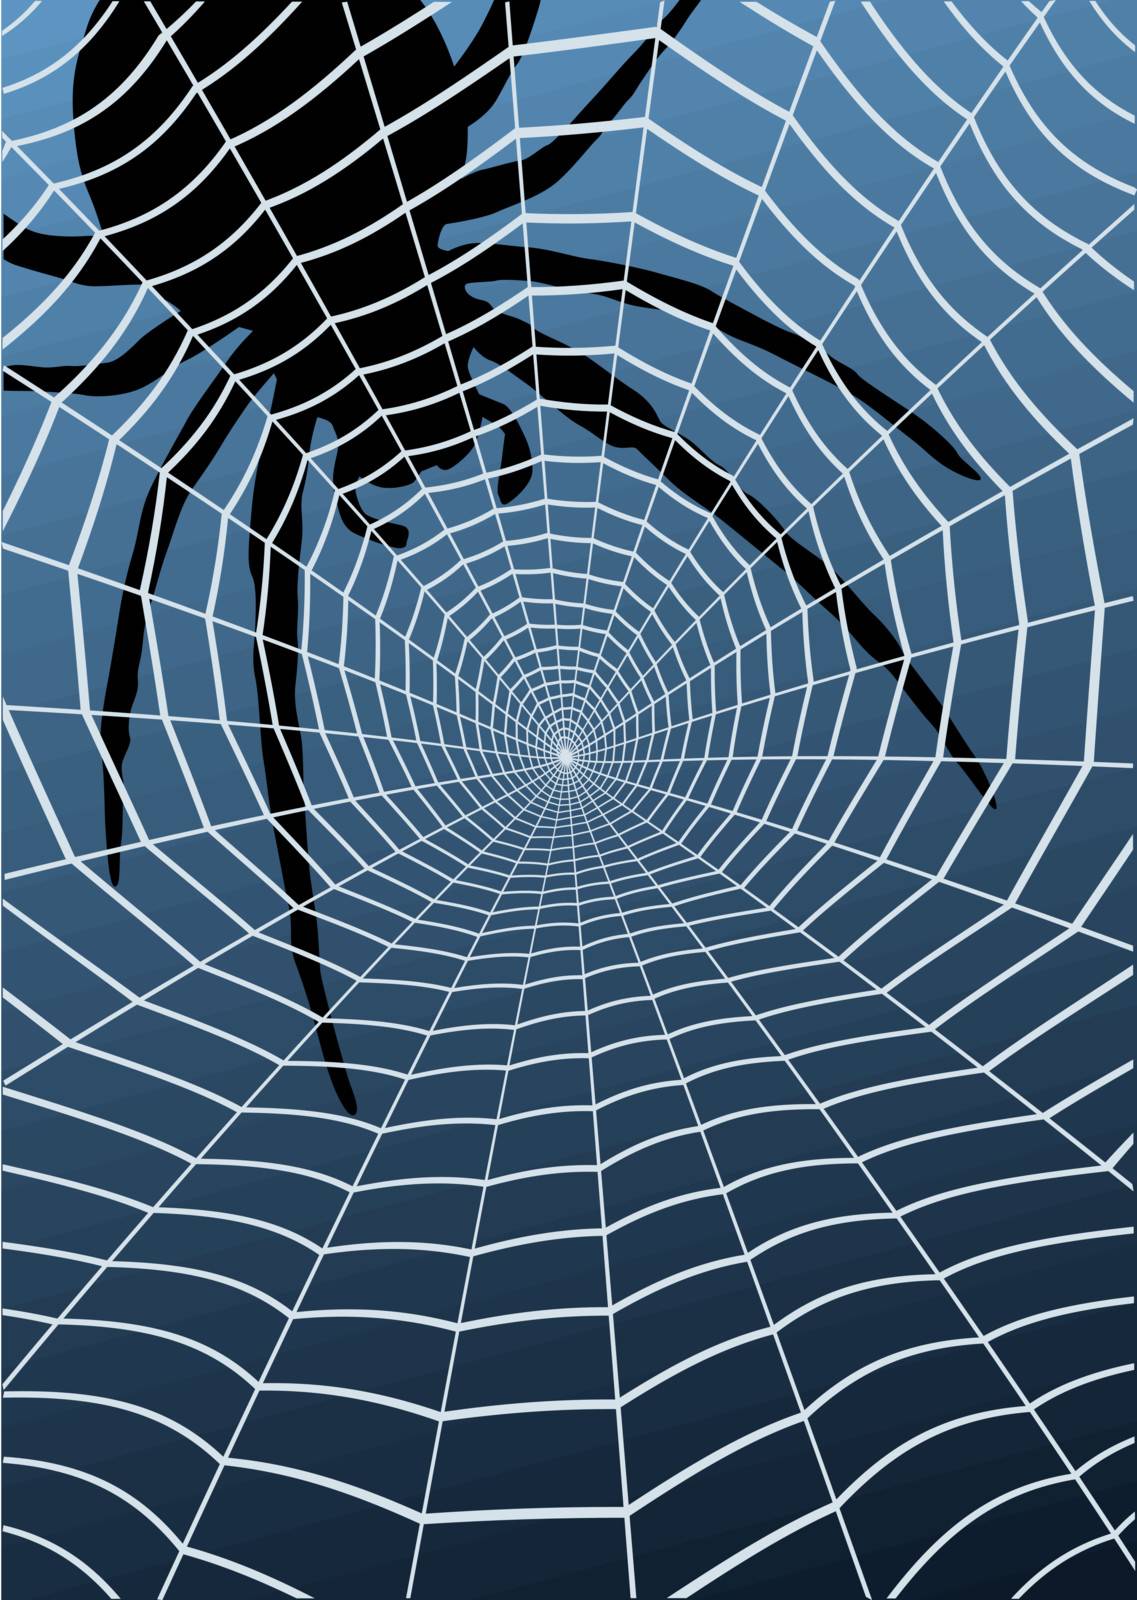 Spider and web by Tawng